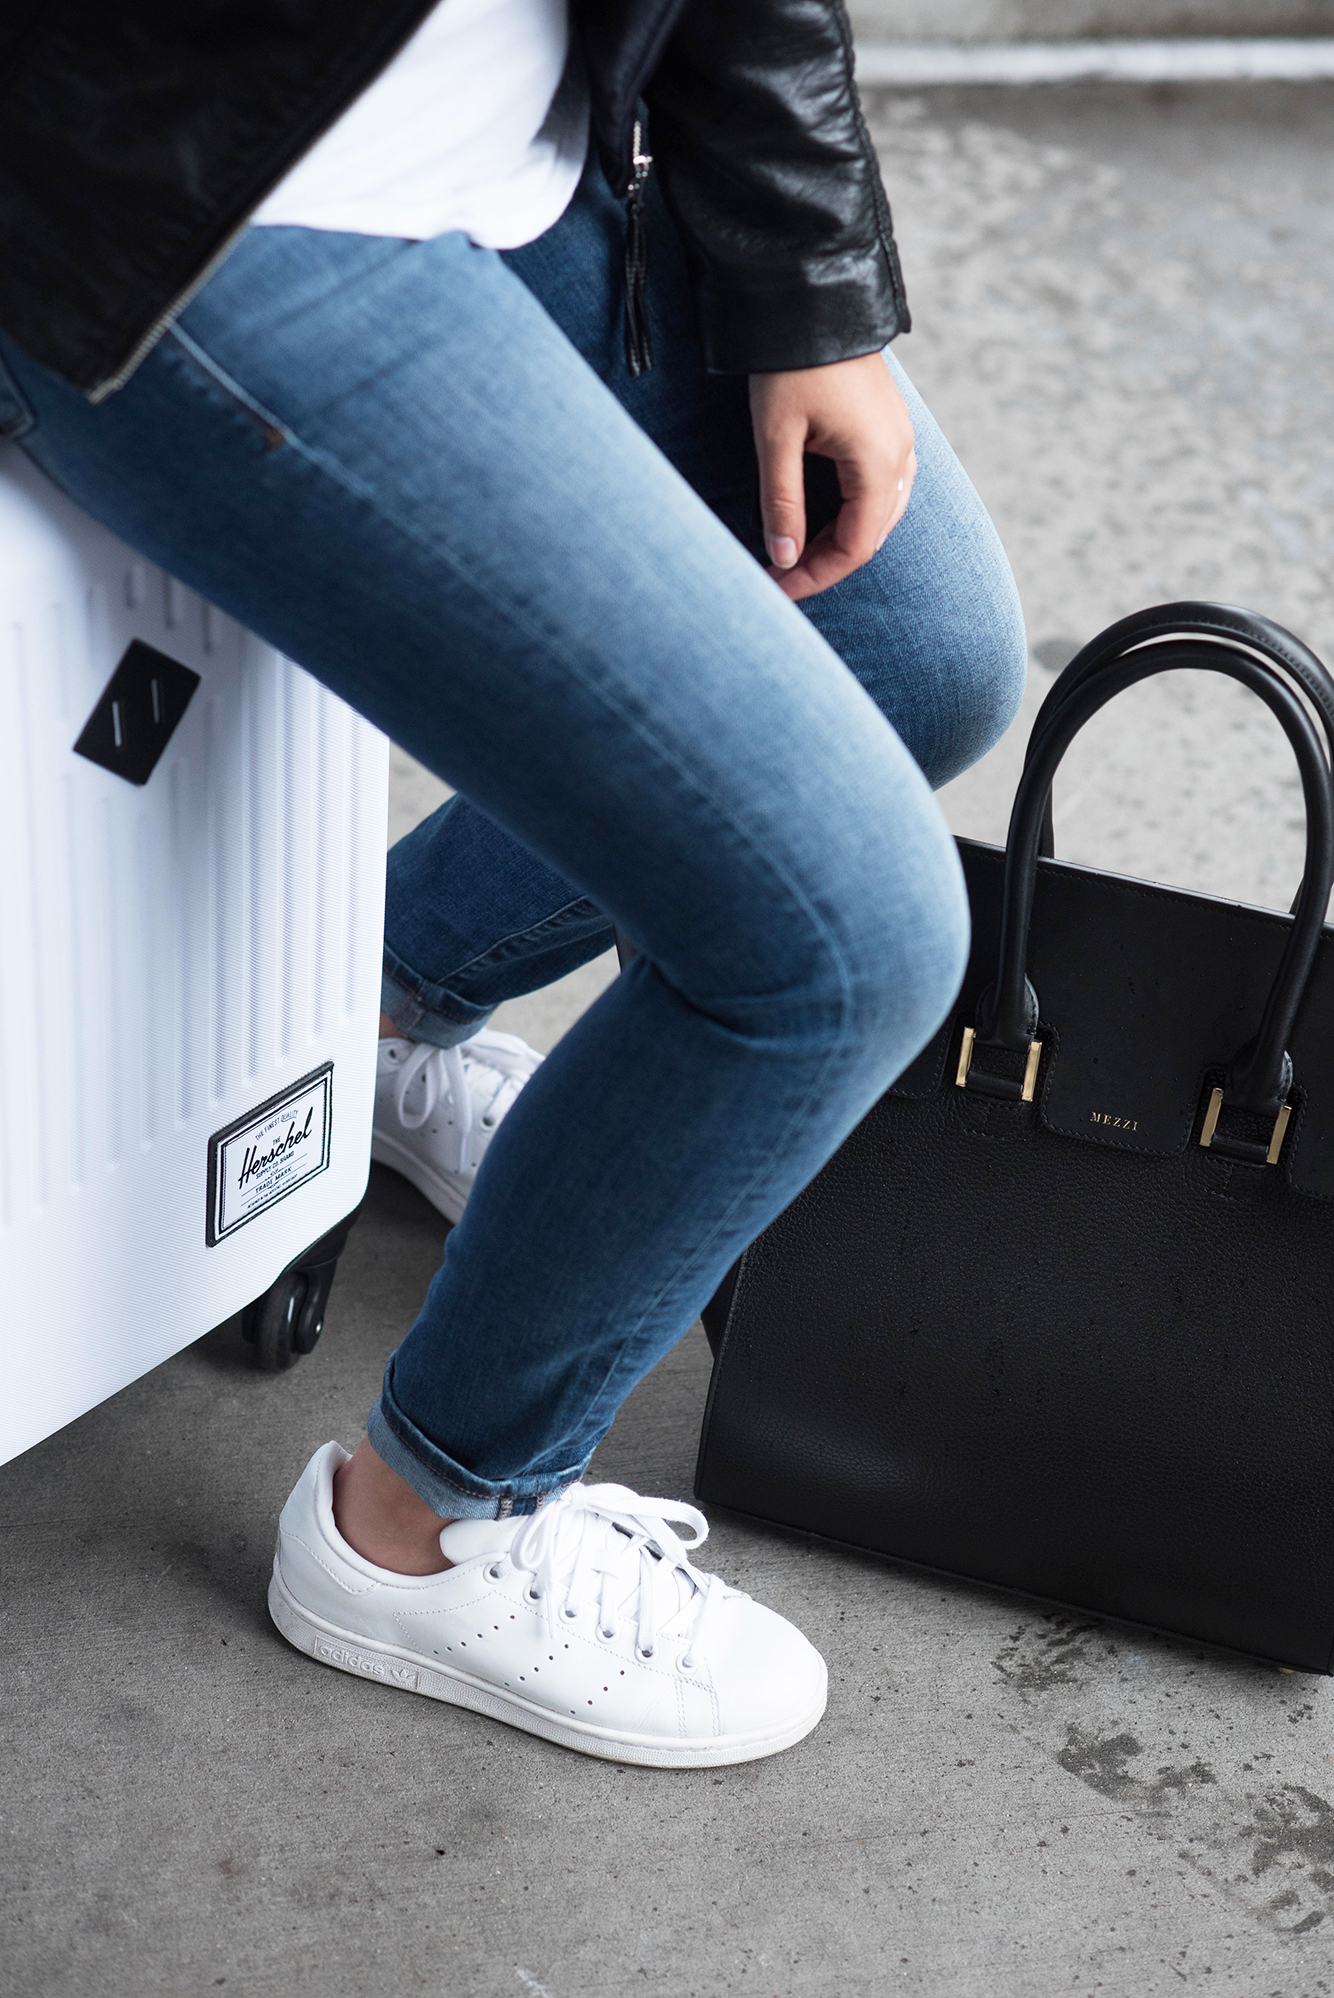 coco-and-vera-top-vancouver-style-blog-top-canadian-style-blog-top-blogger-details-adidas-stan-smith-herschel-suitcase-mavi-jeans-mezzi-cosima